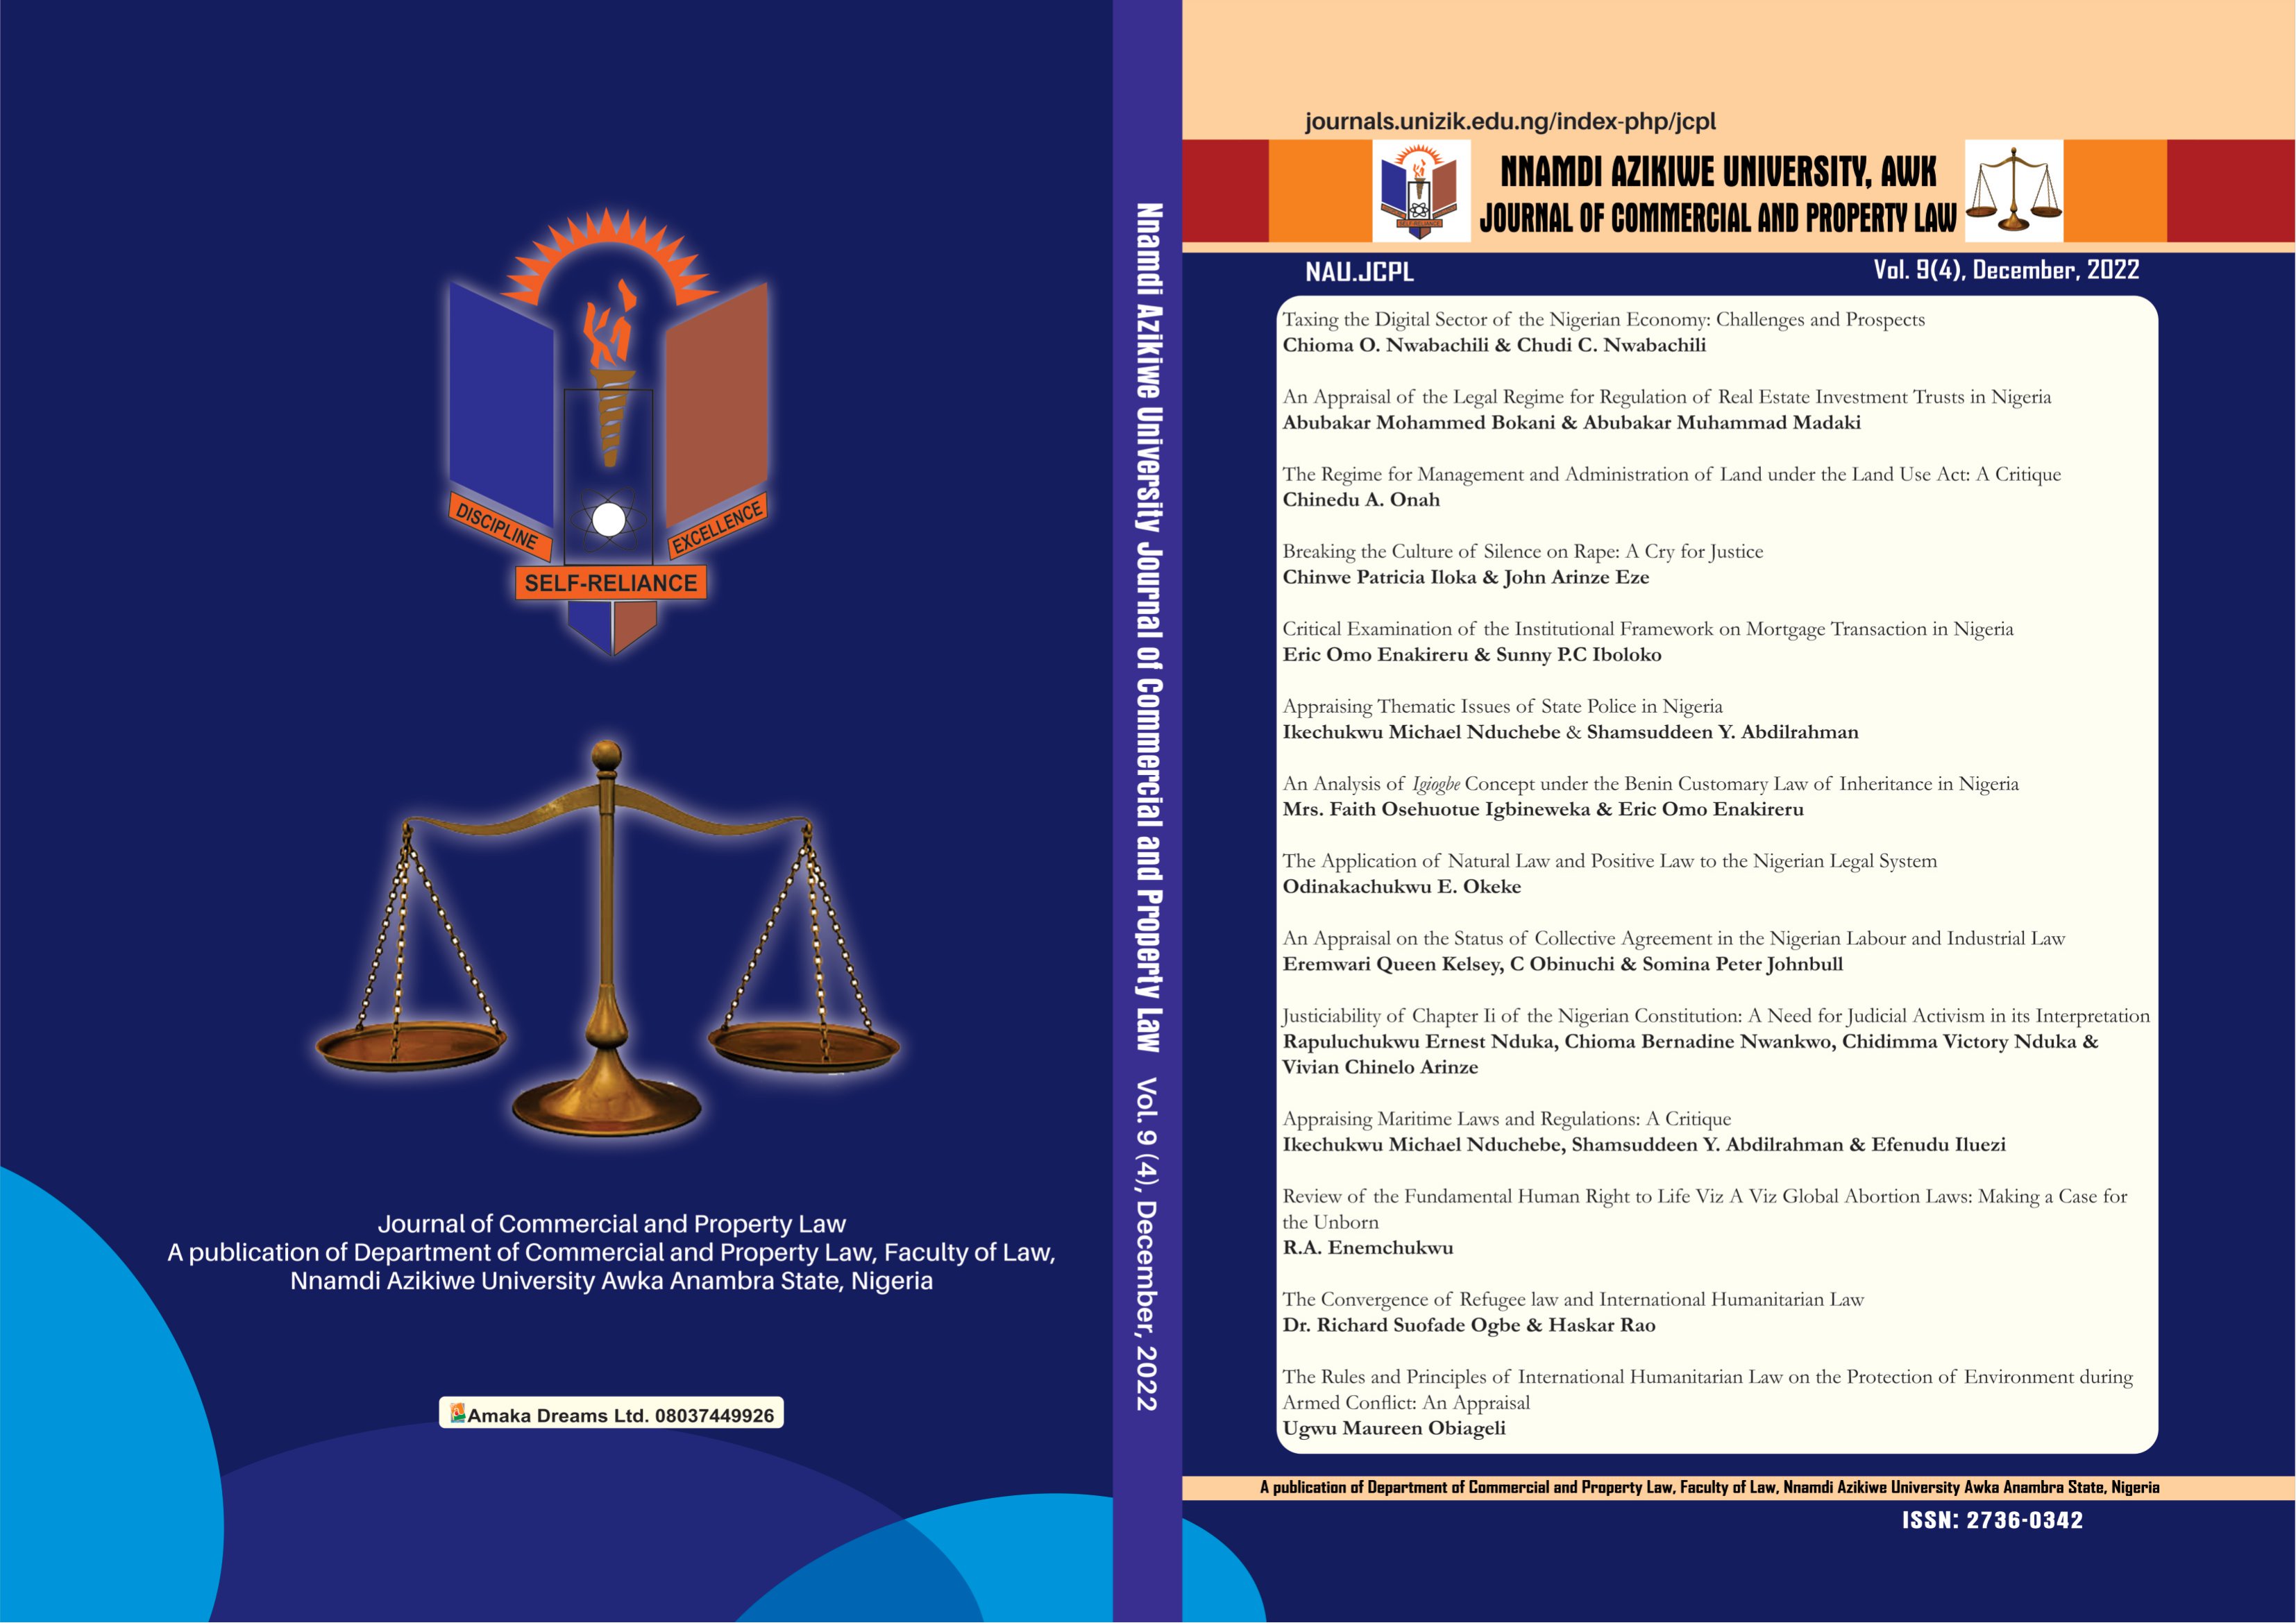 					View Vol. 9 No. 4 (2022): NNAMDI AZIKIWE UNIVERSITY JOURNAL OF COMMERCIAL AND PROPERTY LAW
				